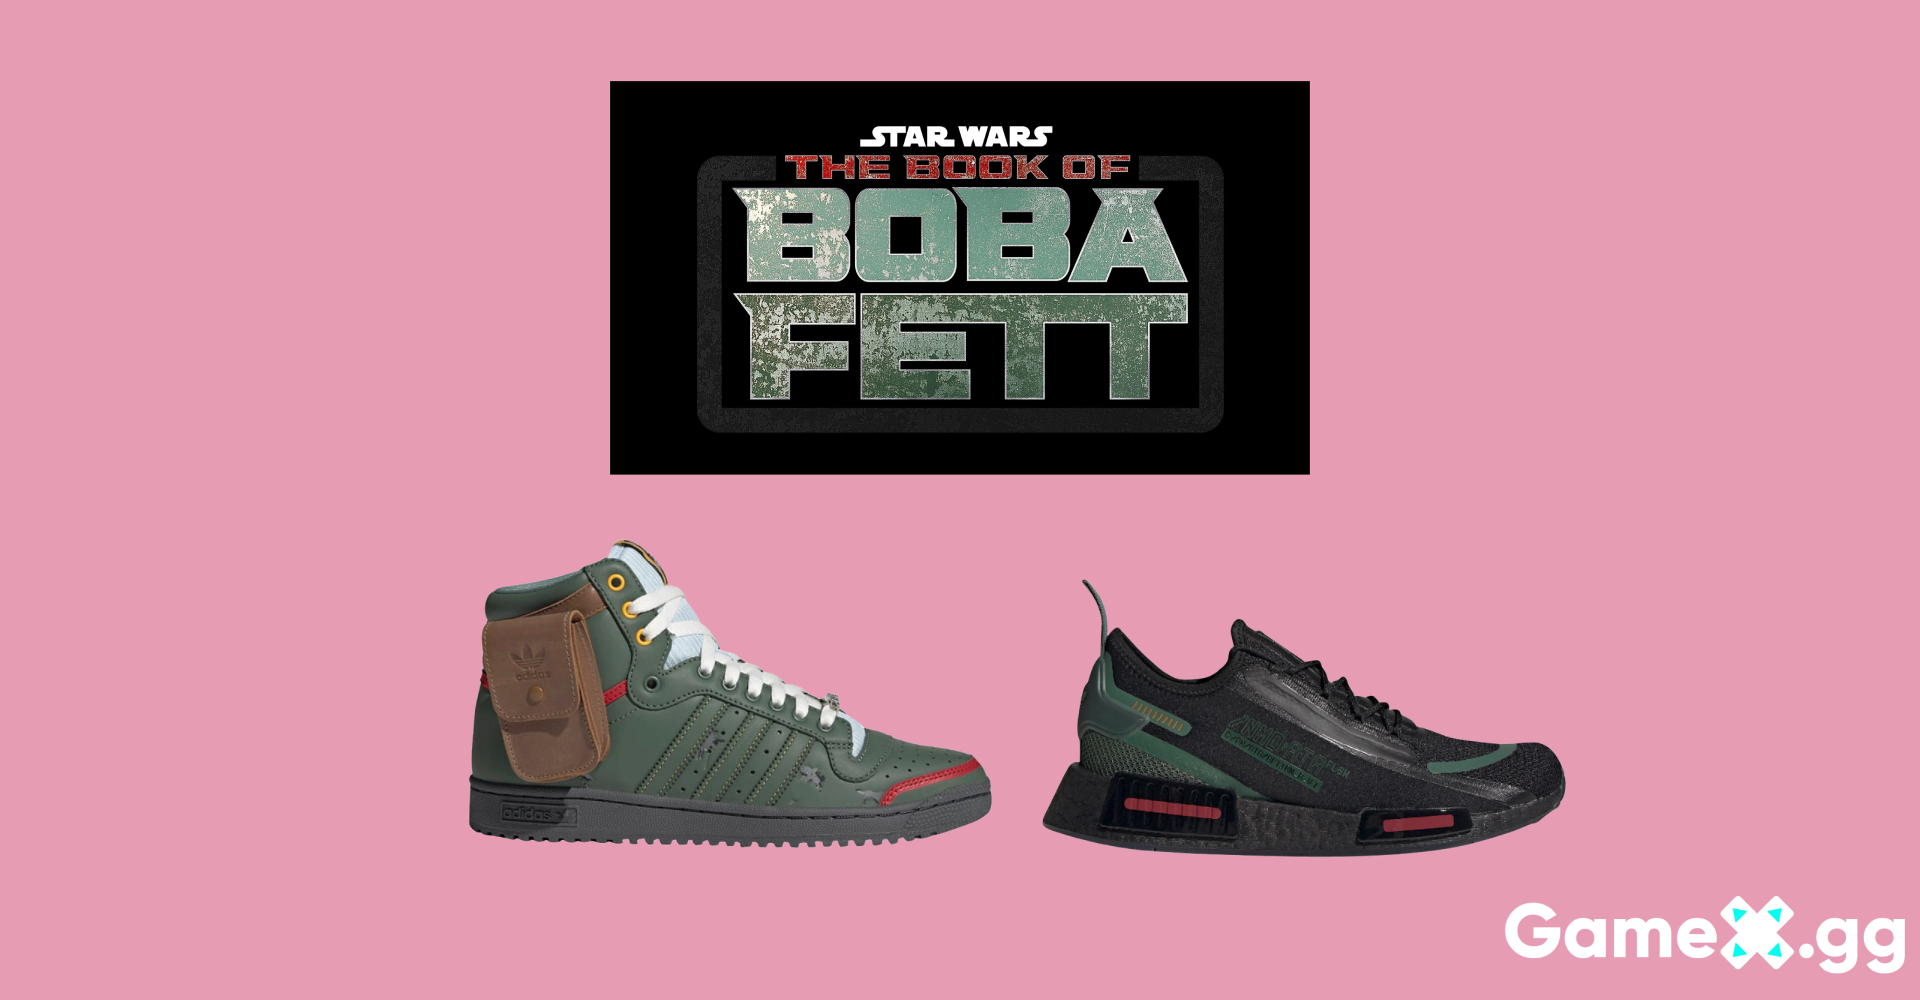 Enrich Exceed Arab Sarabo These Star Wars Boba Fett Shoes Are Really Valuable – GameX.gg